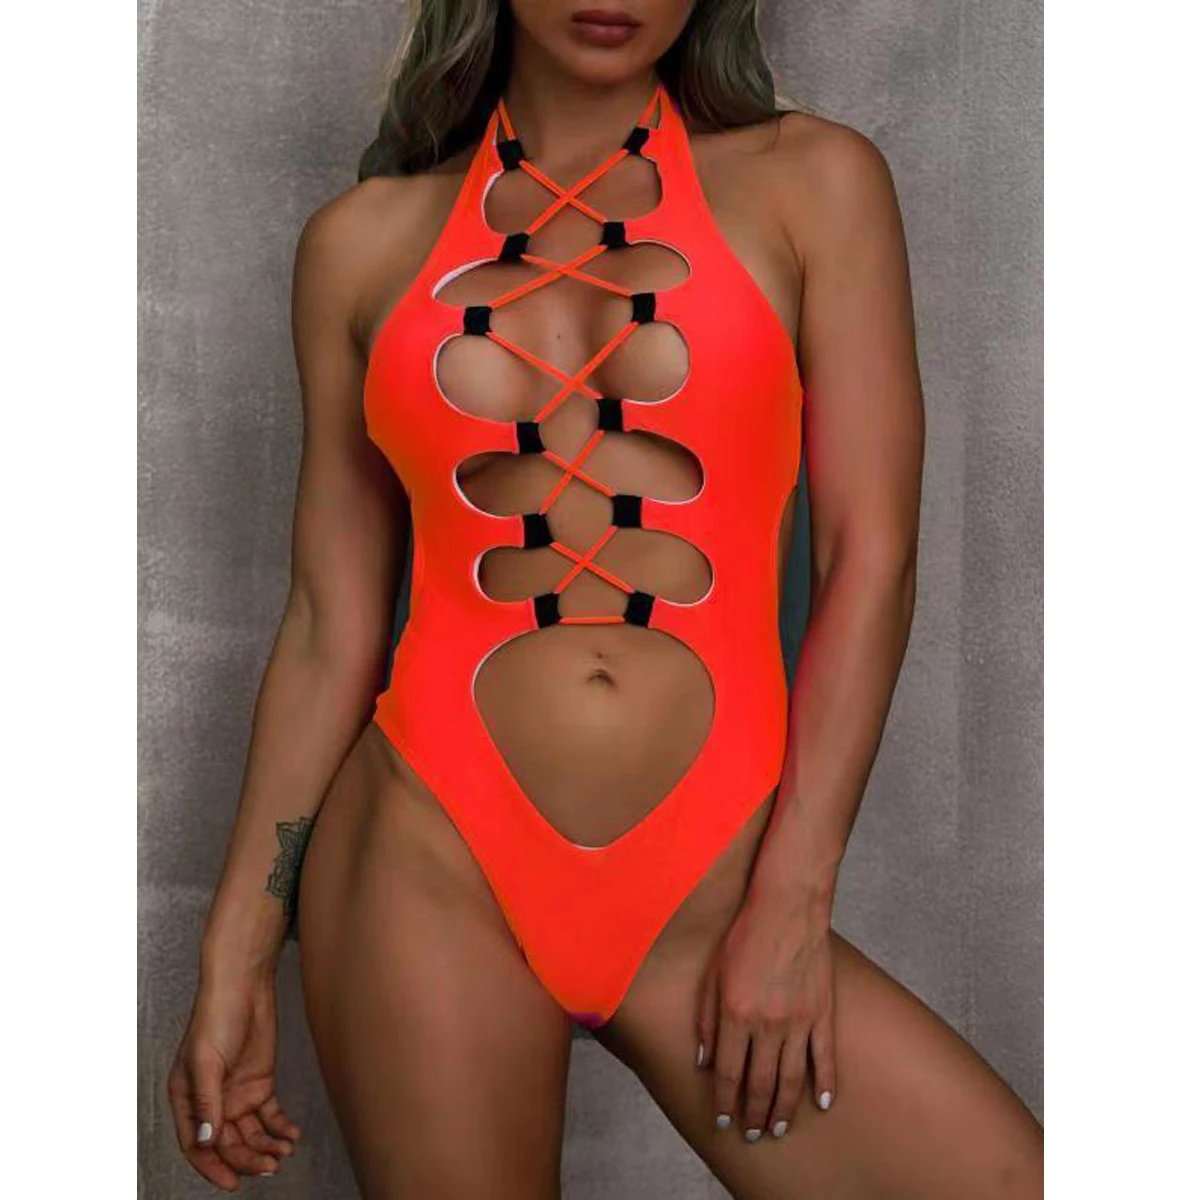 

JS1801 summer new arrivals beach halter ladies swimwear sexy cross string one piece hollow out swimsuits for women 2021, As shown